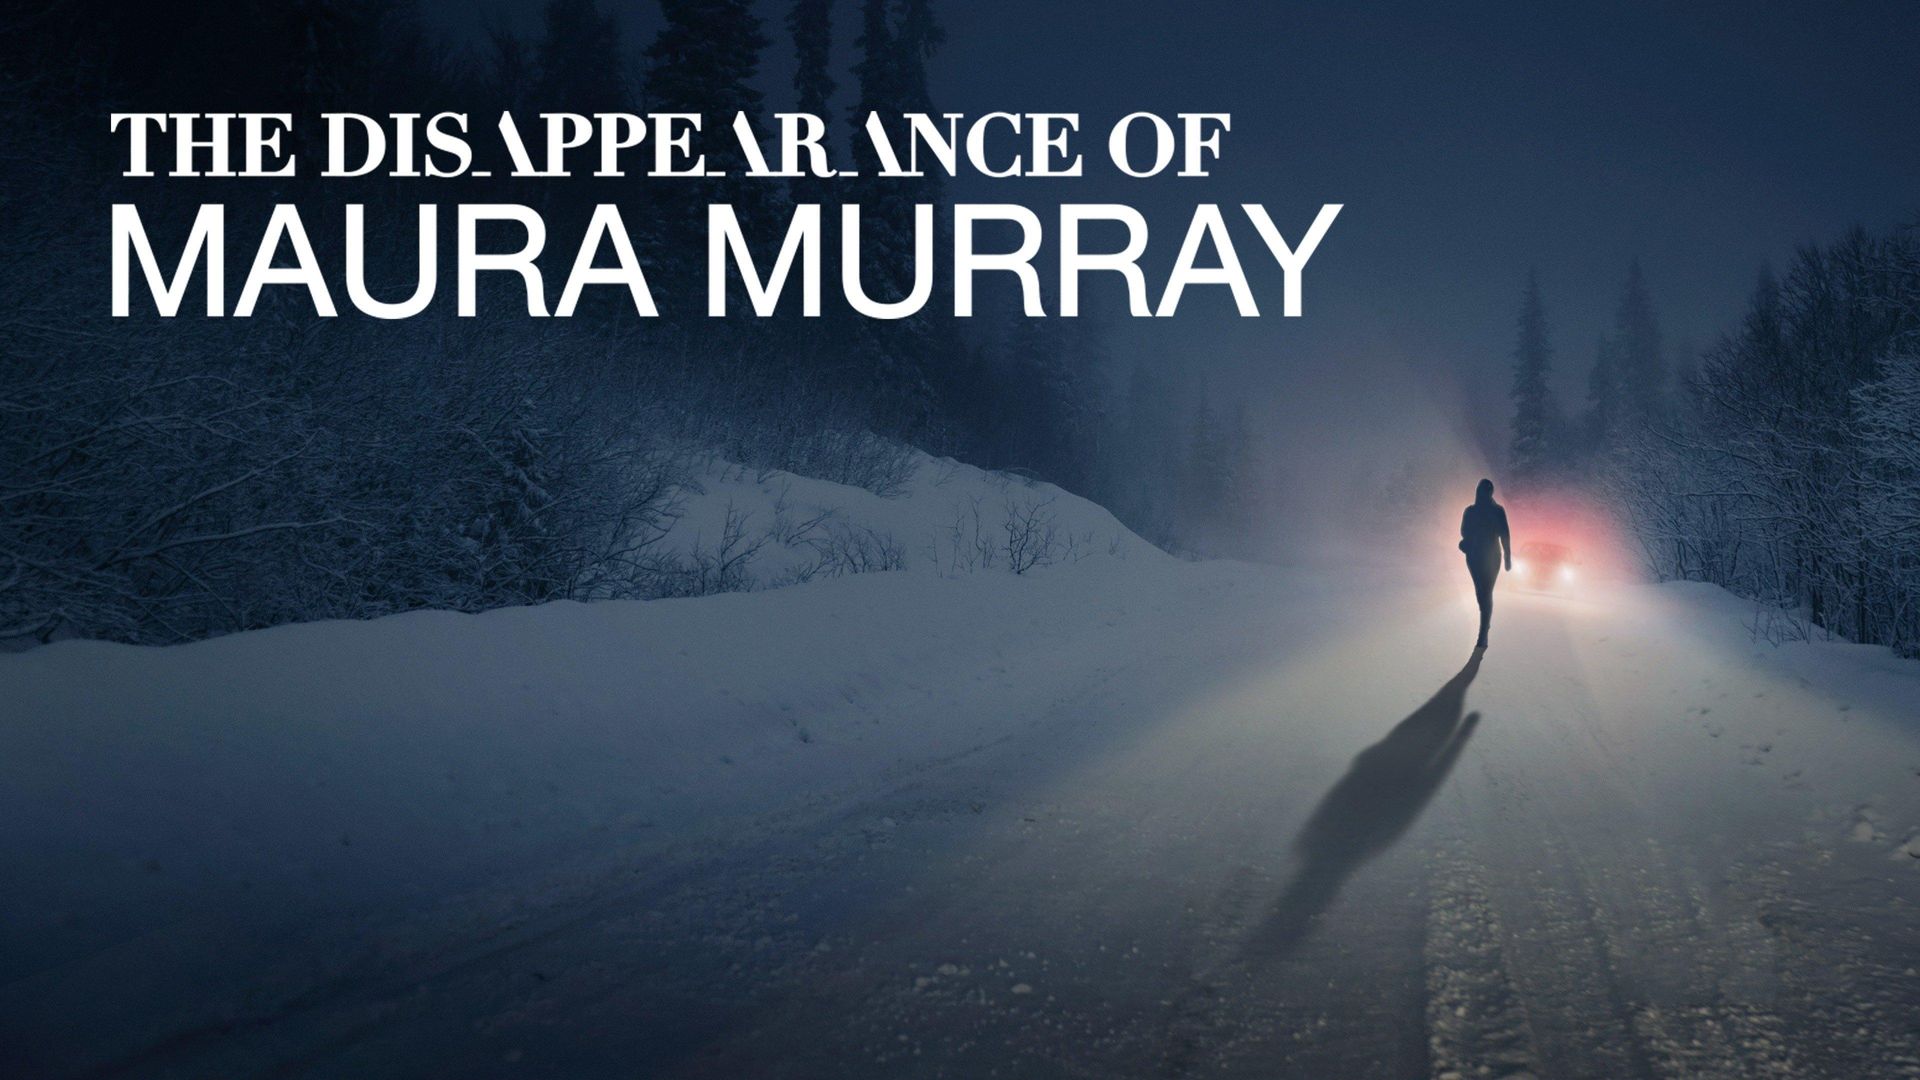 The Disappearance of Maura Murray Backdrop